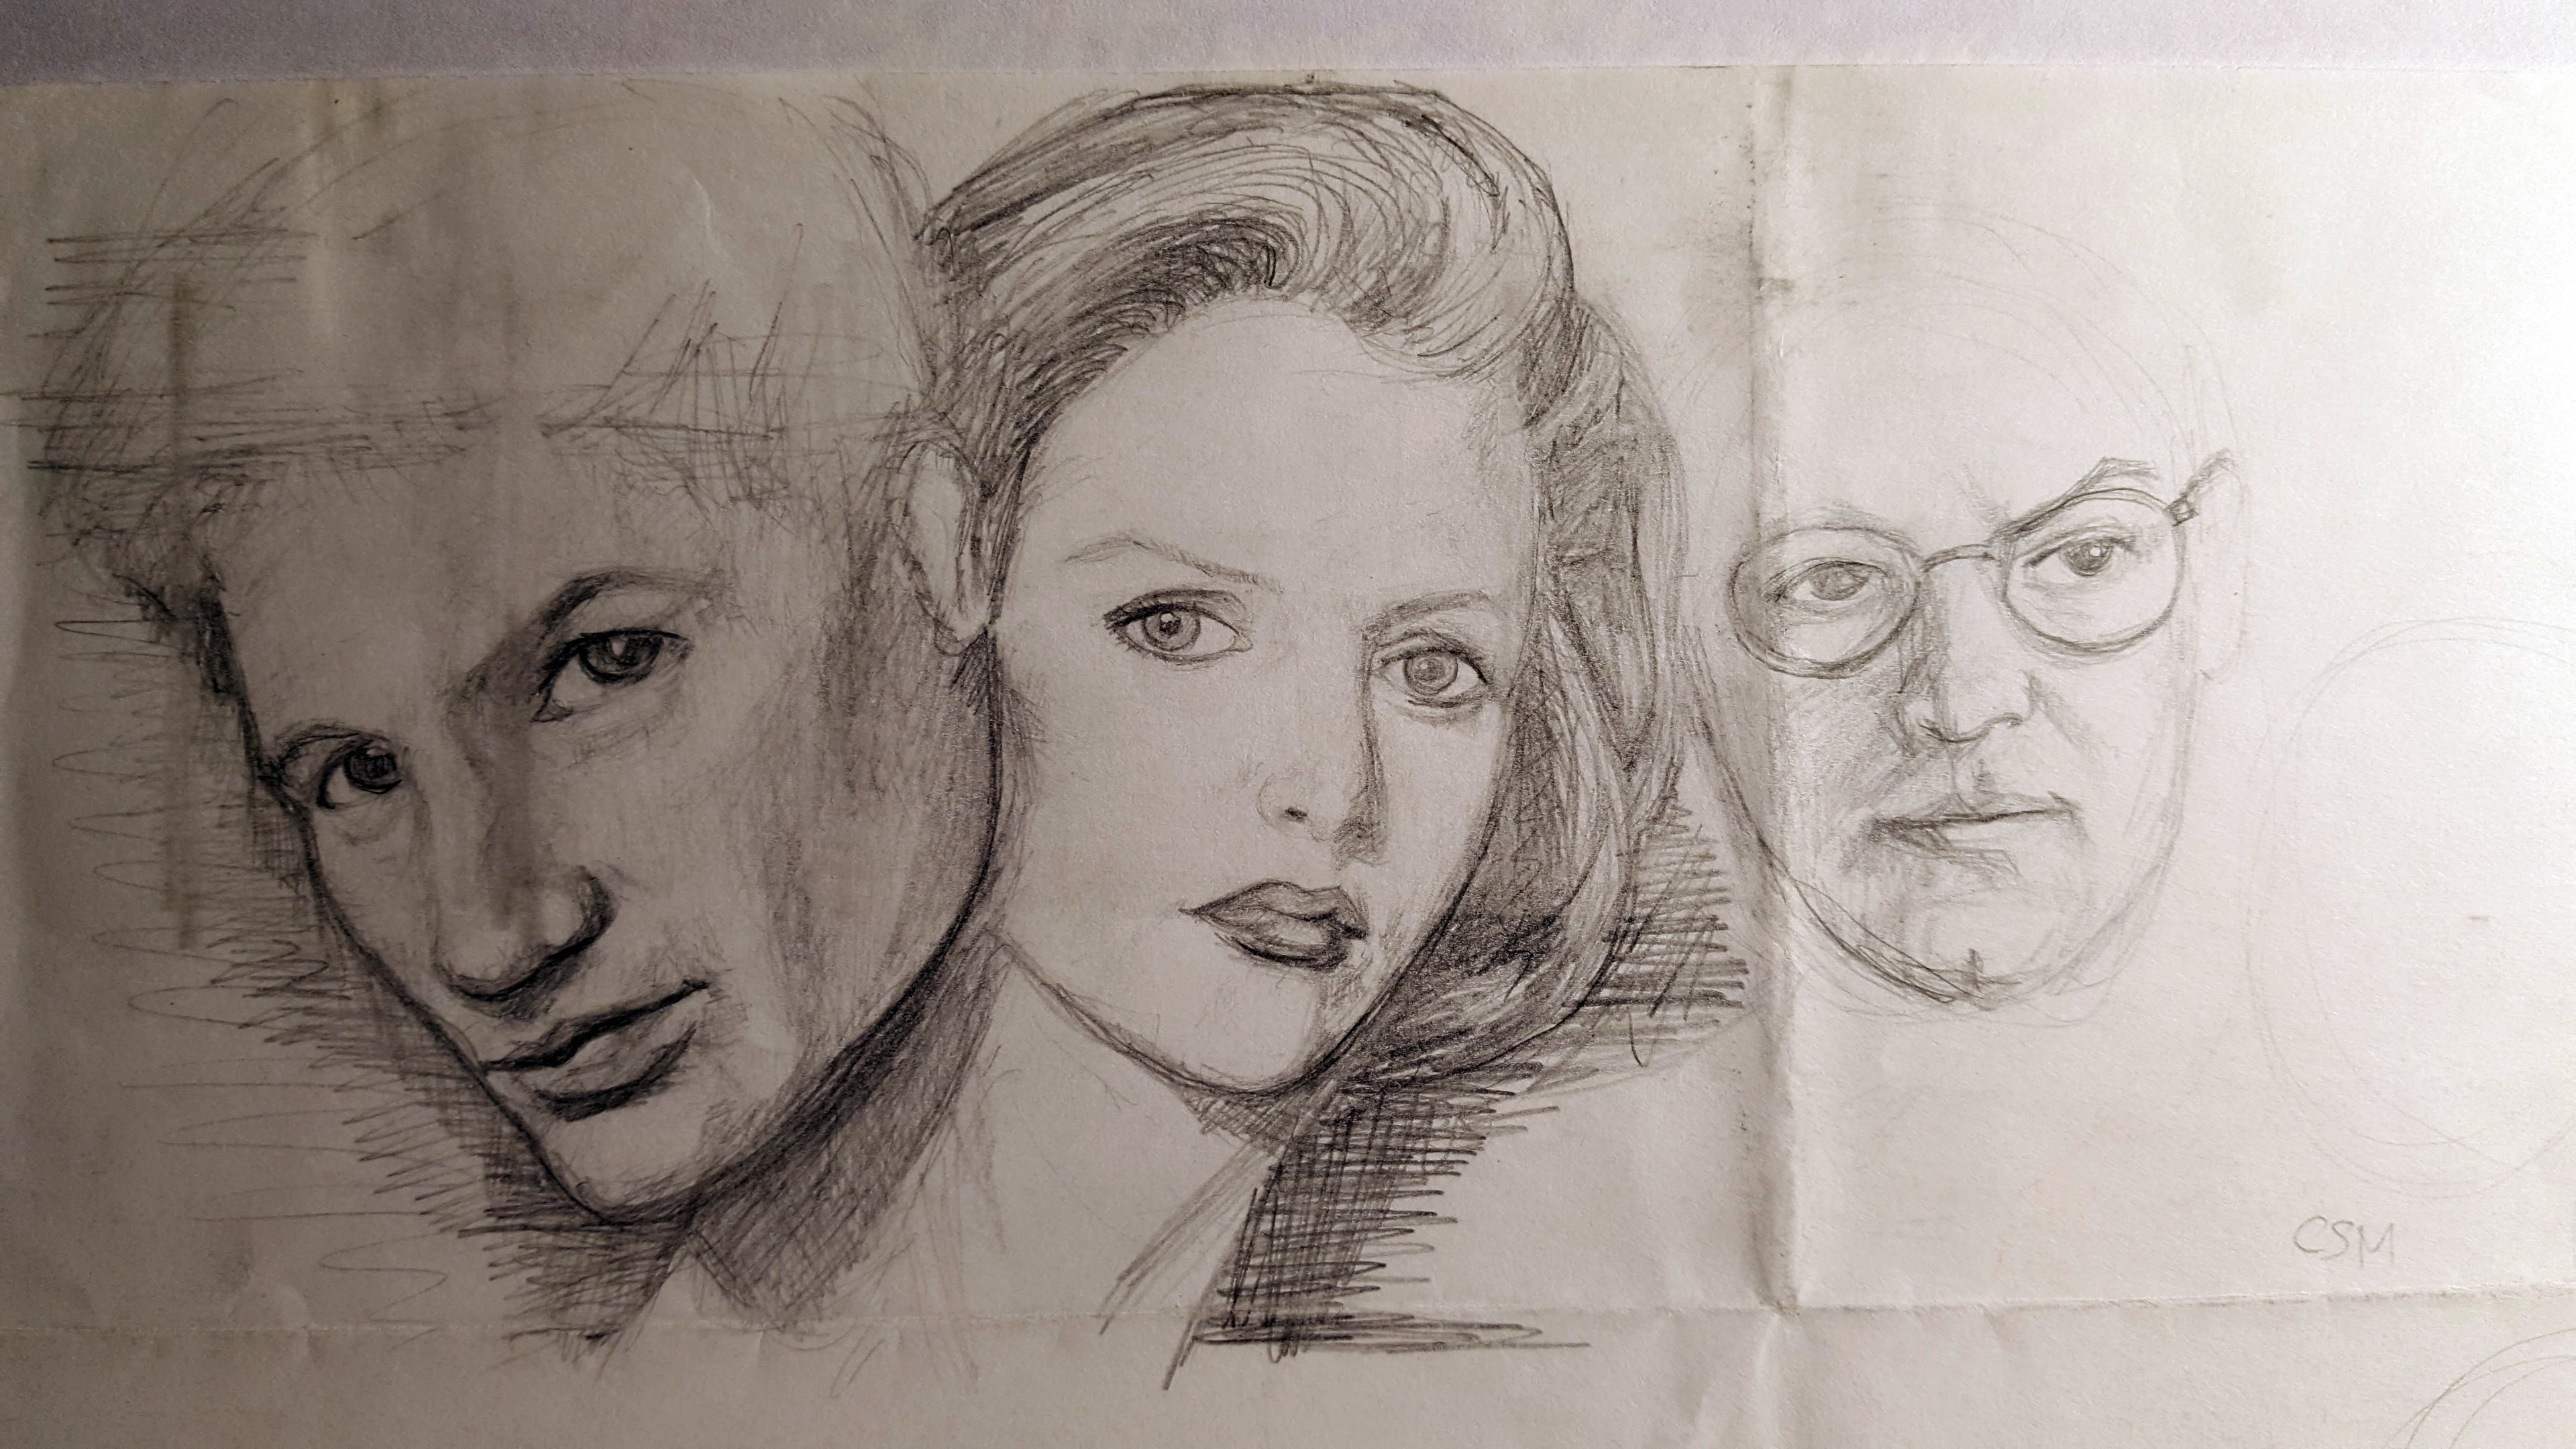 X-Files. Mulder, Scully, and unfinished Skinner.